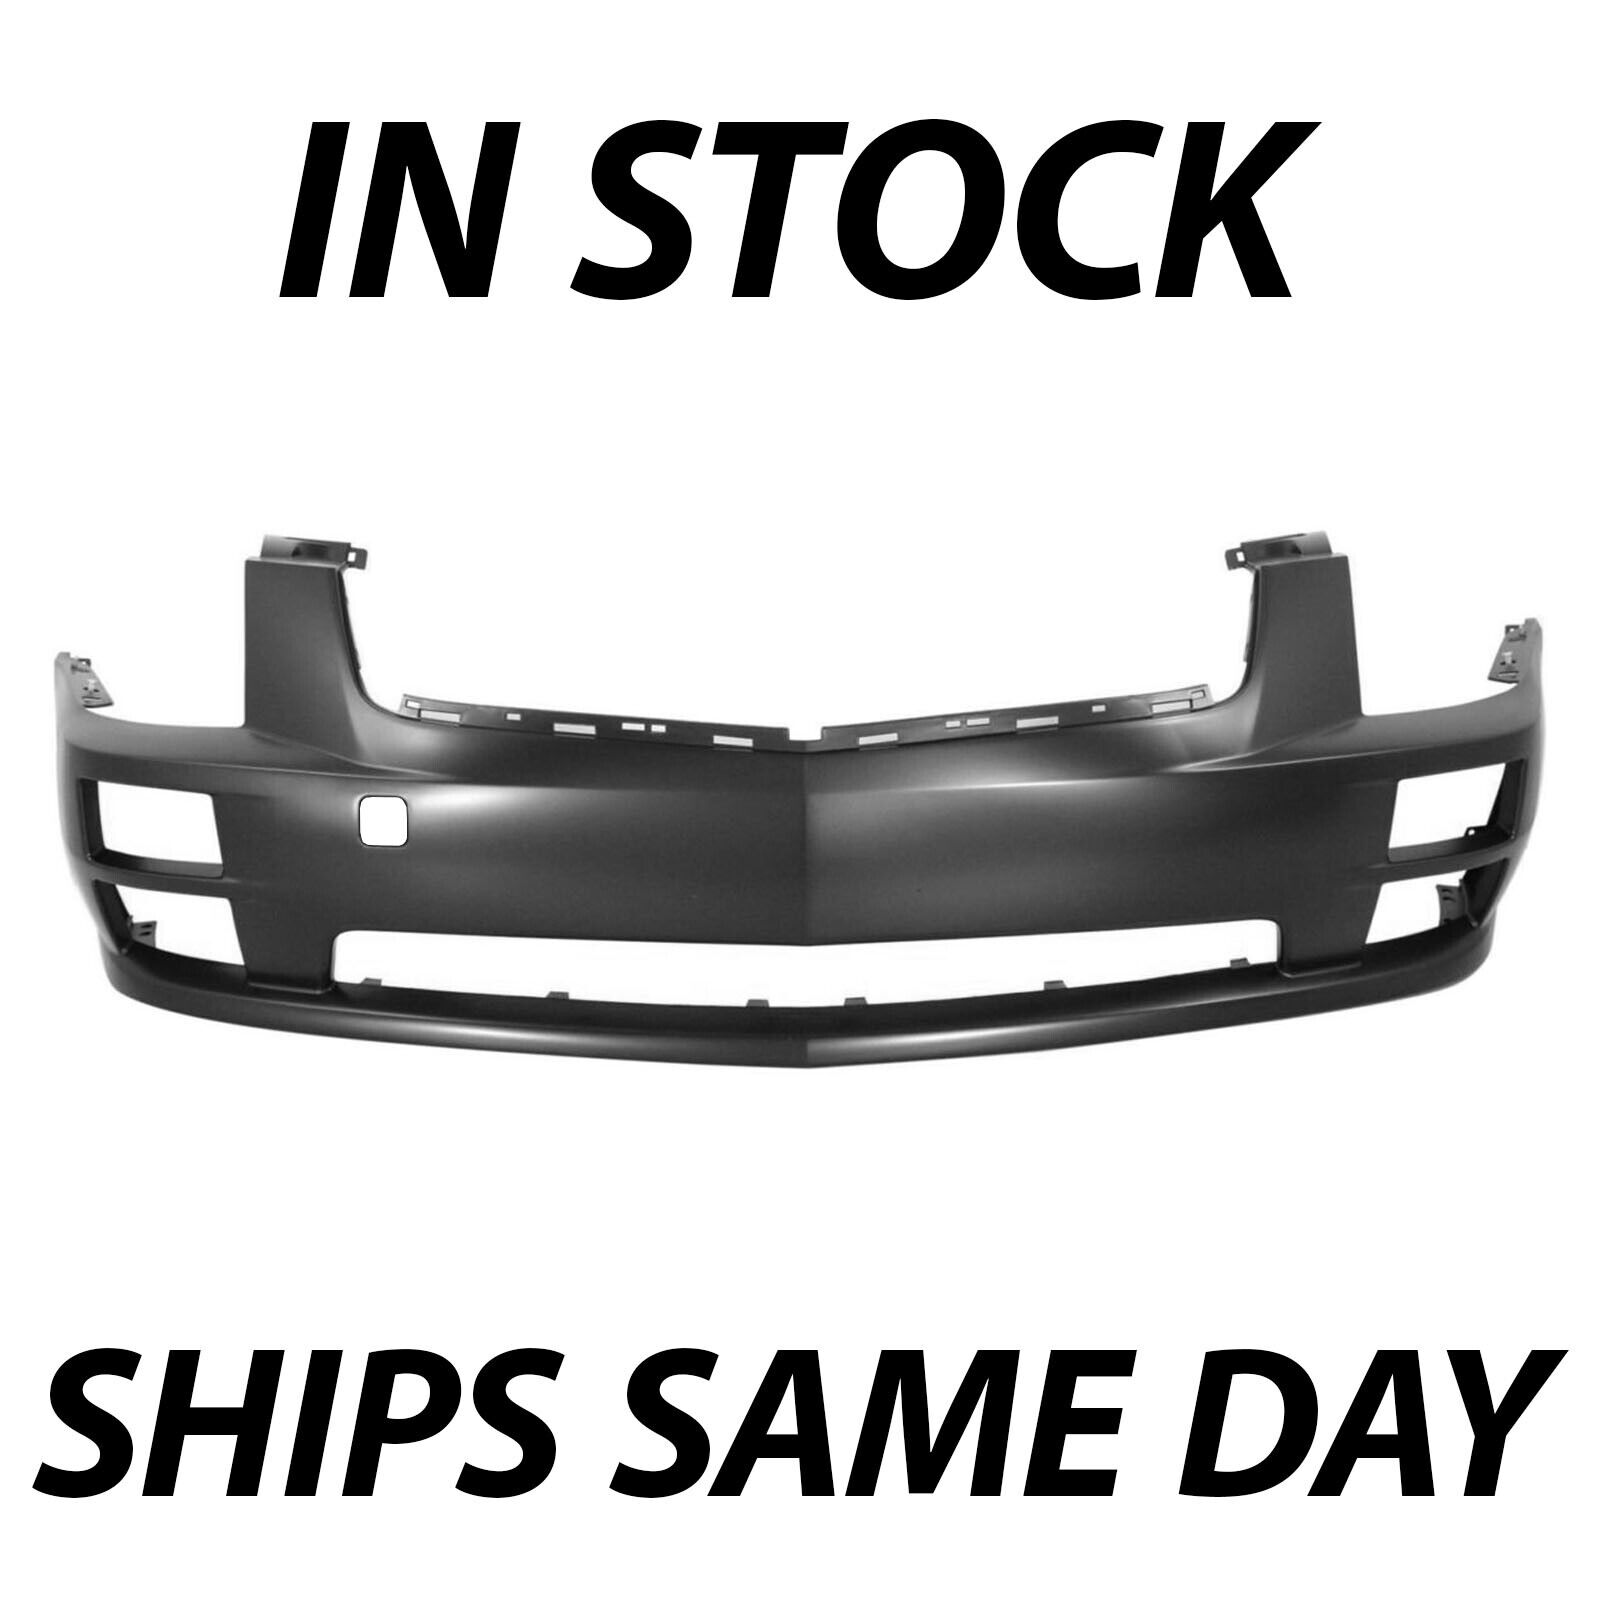 NEW Primered - Front Bumper Cover Fascia Replacement for 2005-2007 Cadillac STS